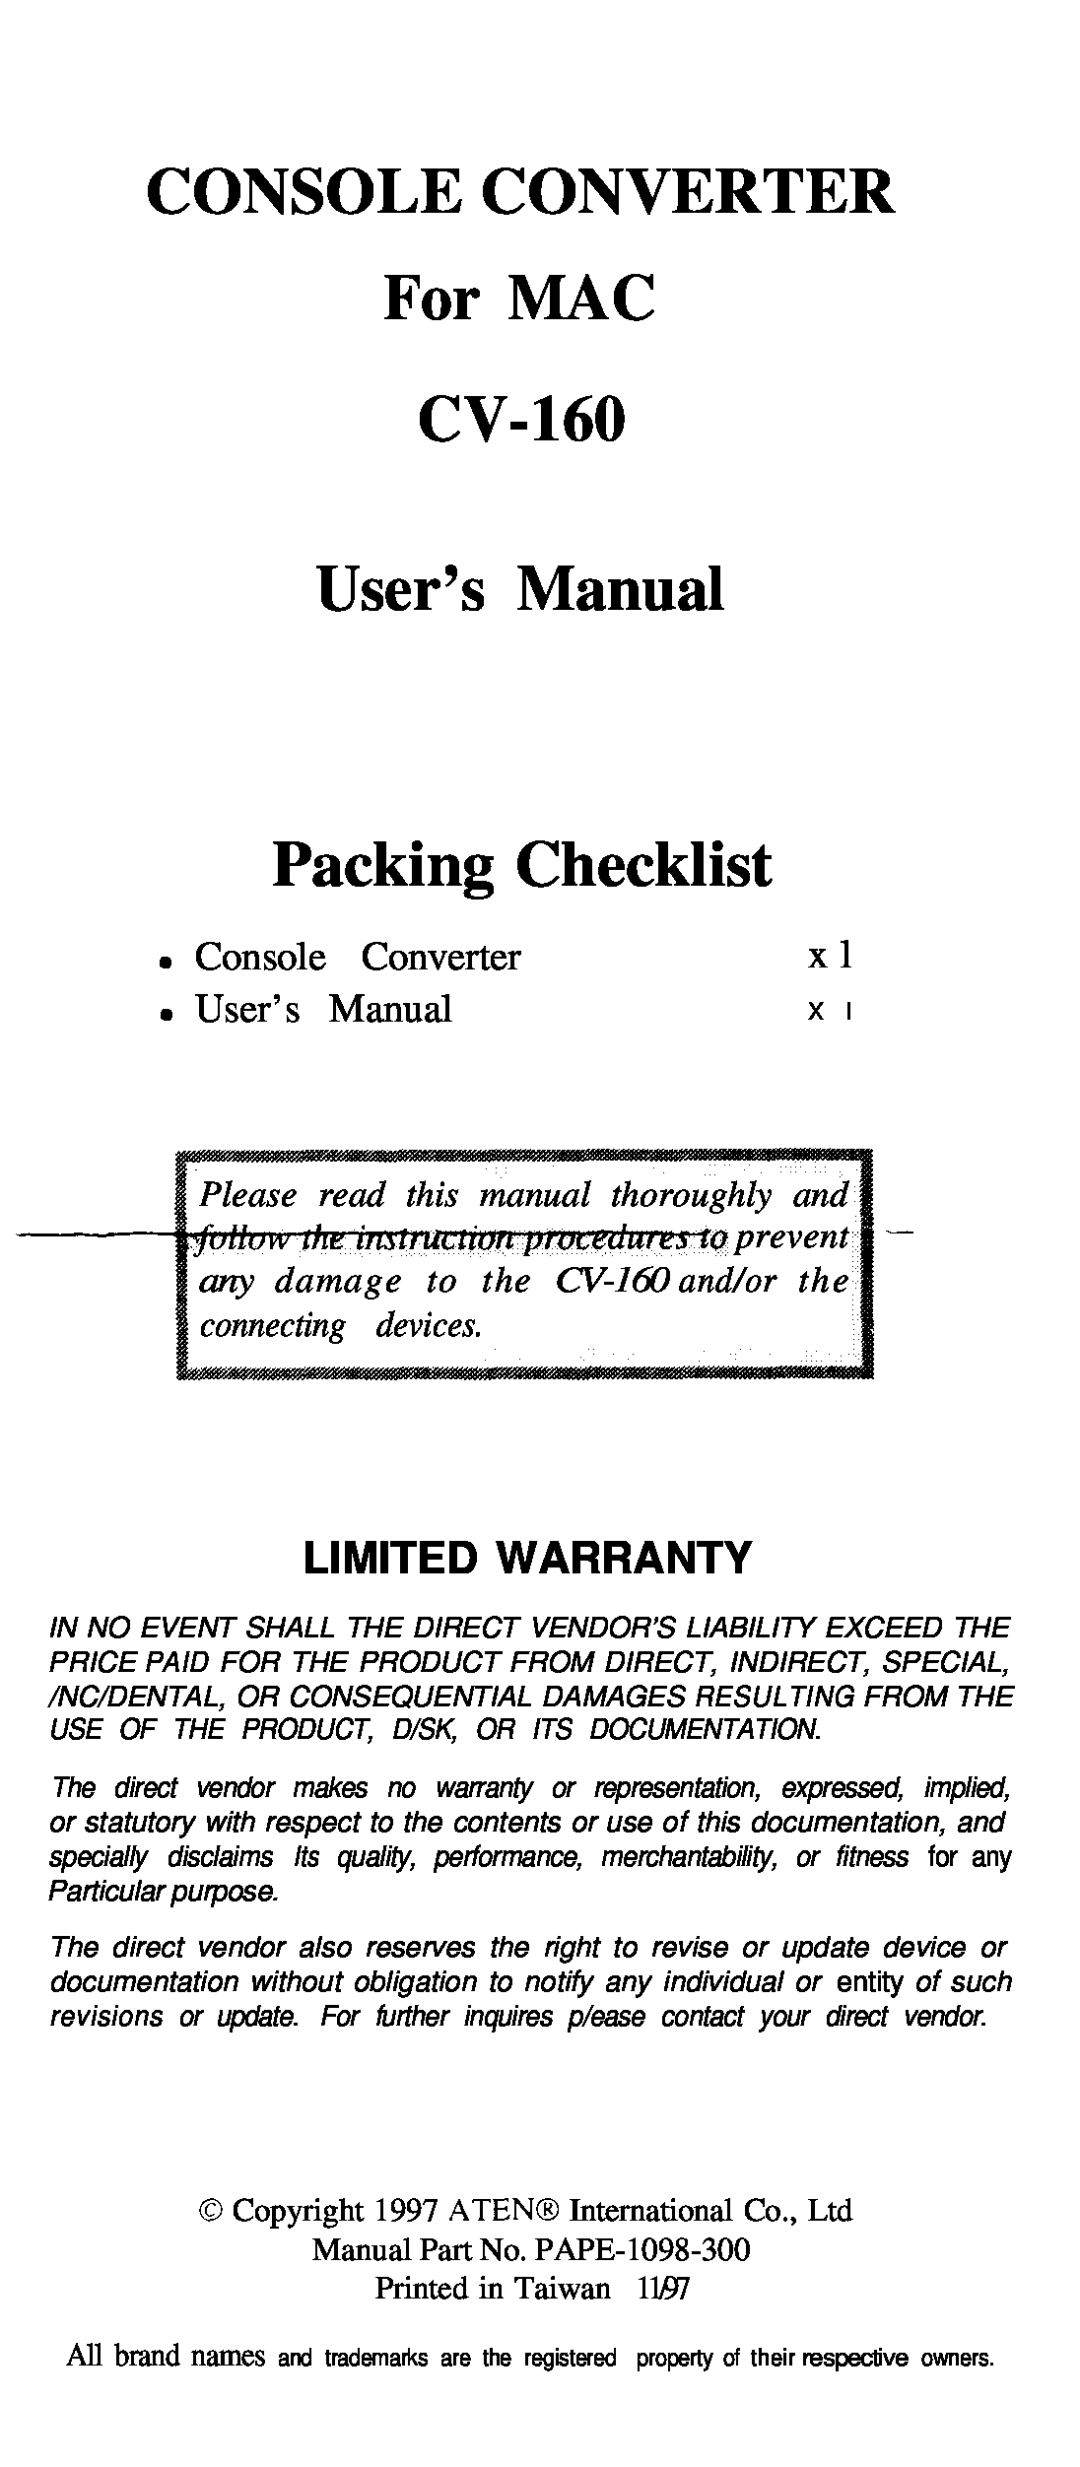 QVS warranty Limited Warranty, CONSOLE CONVERTER For MAC CV-160 User’s Manual Packing Checklist, Console, Converter 